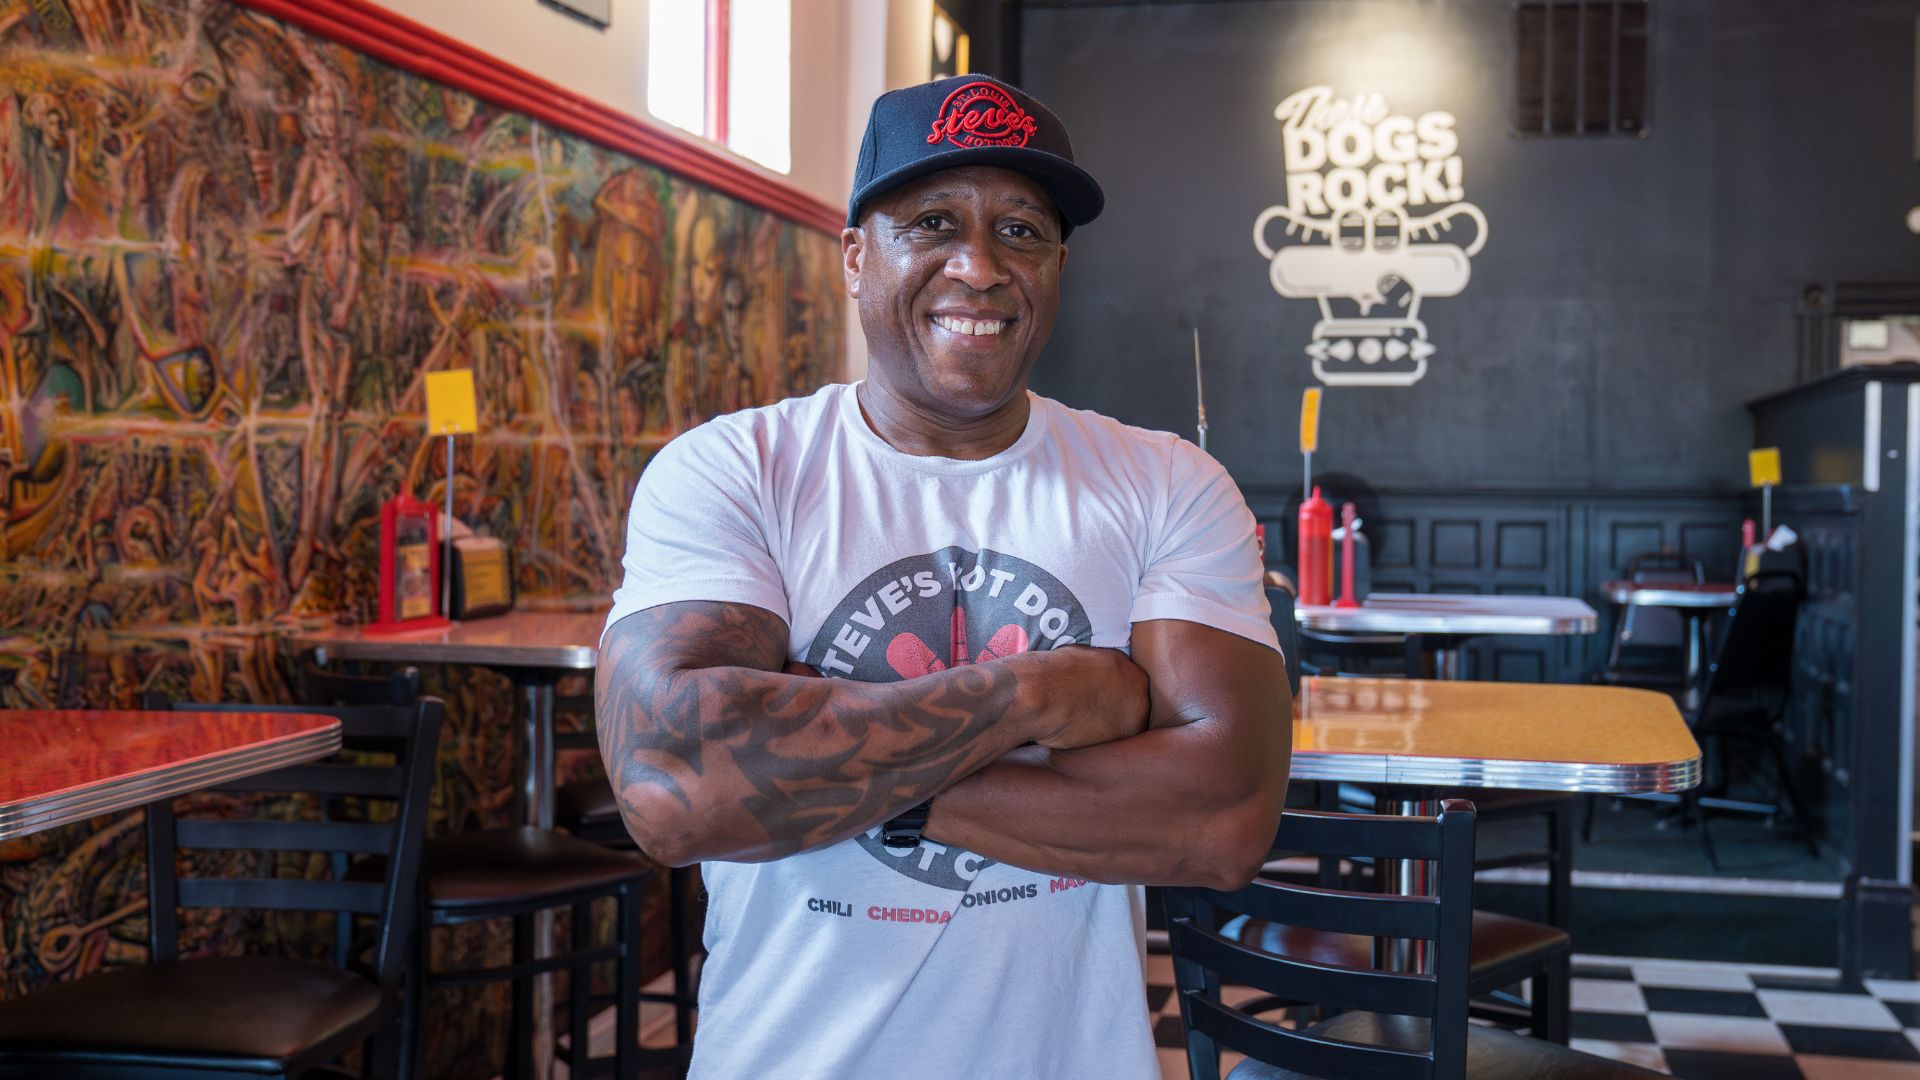 Steve Ewing, owner of Steve's Hot Dogs, poses in his restaurant on South Grand.